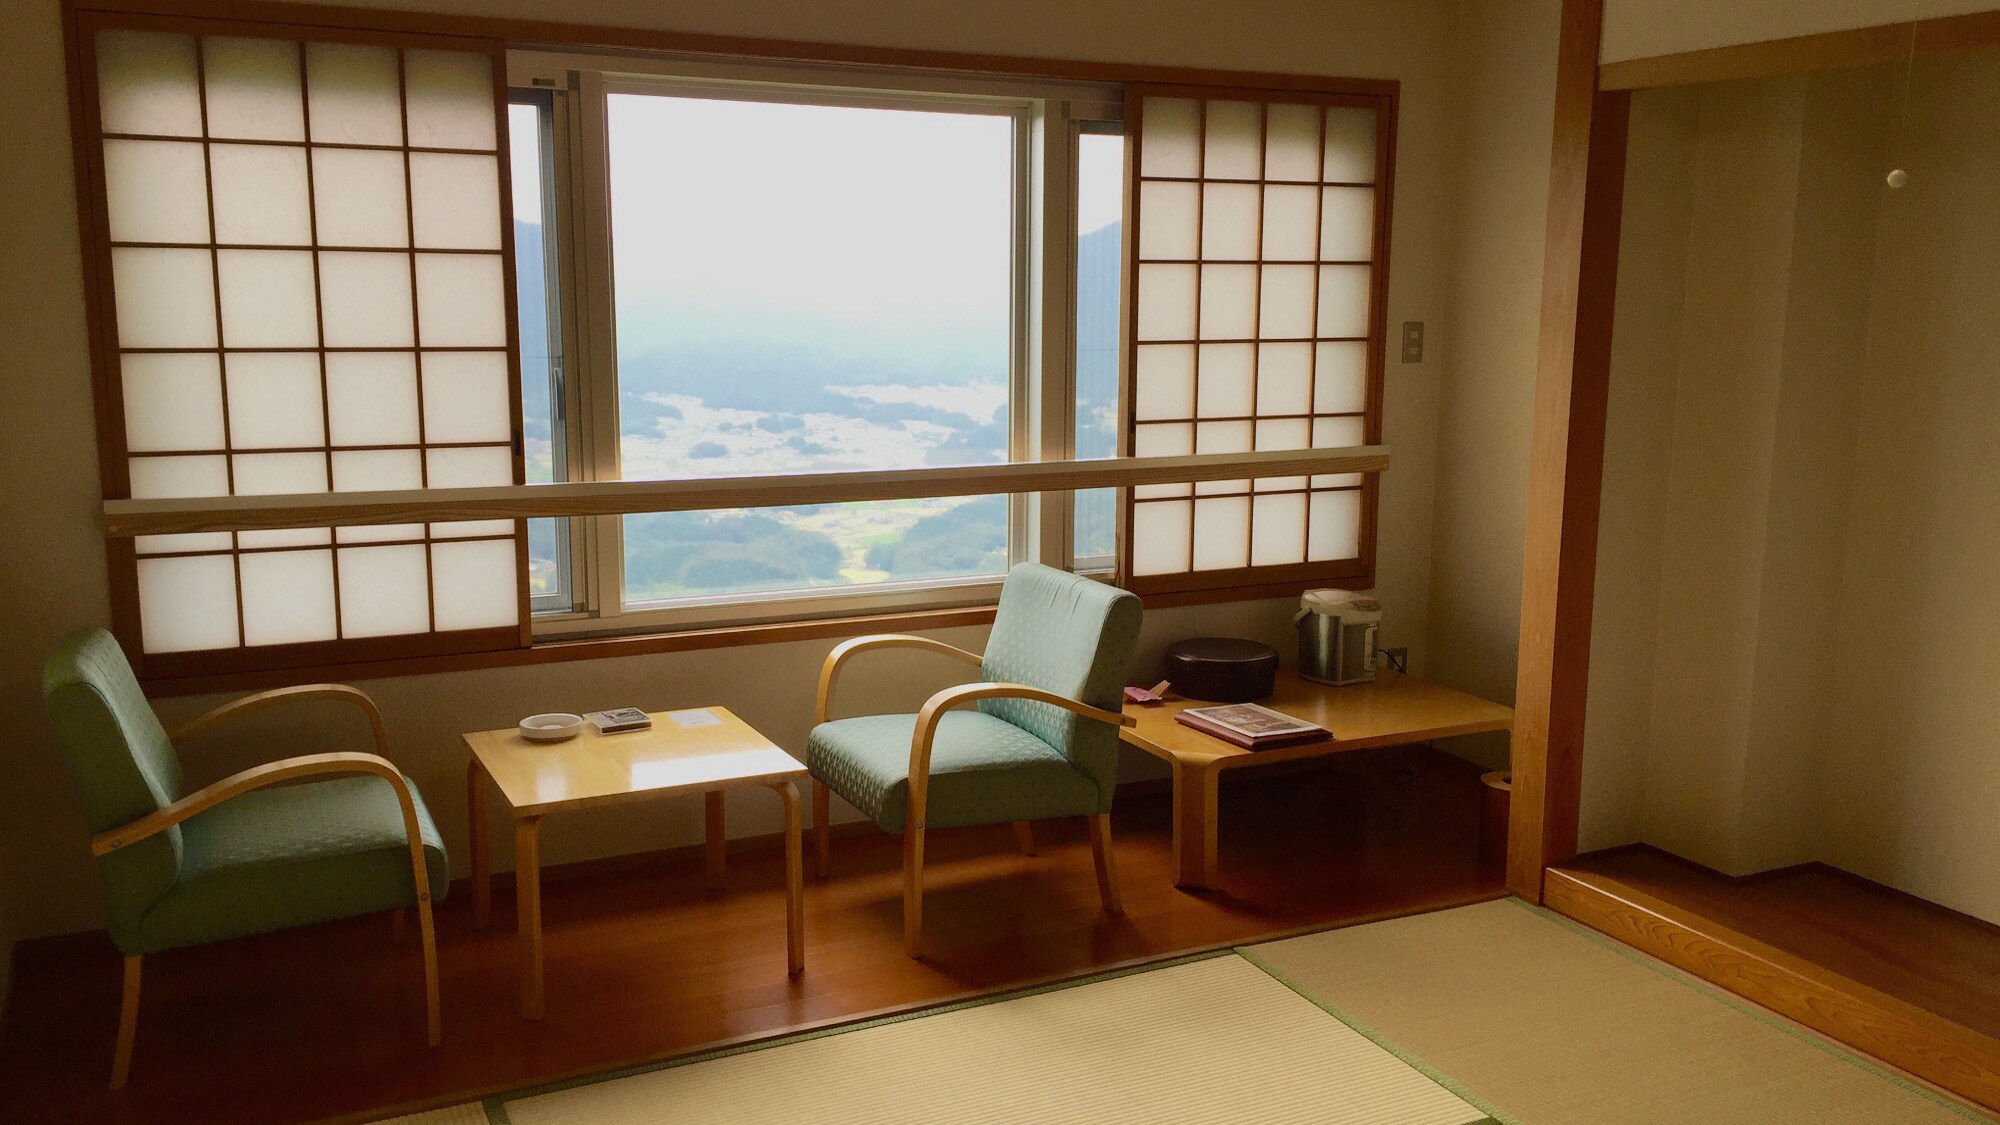 Japanese-style room with a view (8-10 tatami mats)